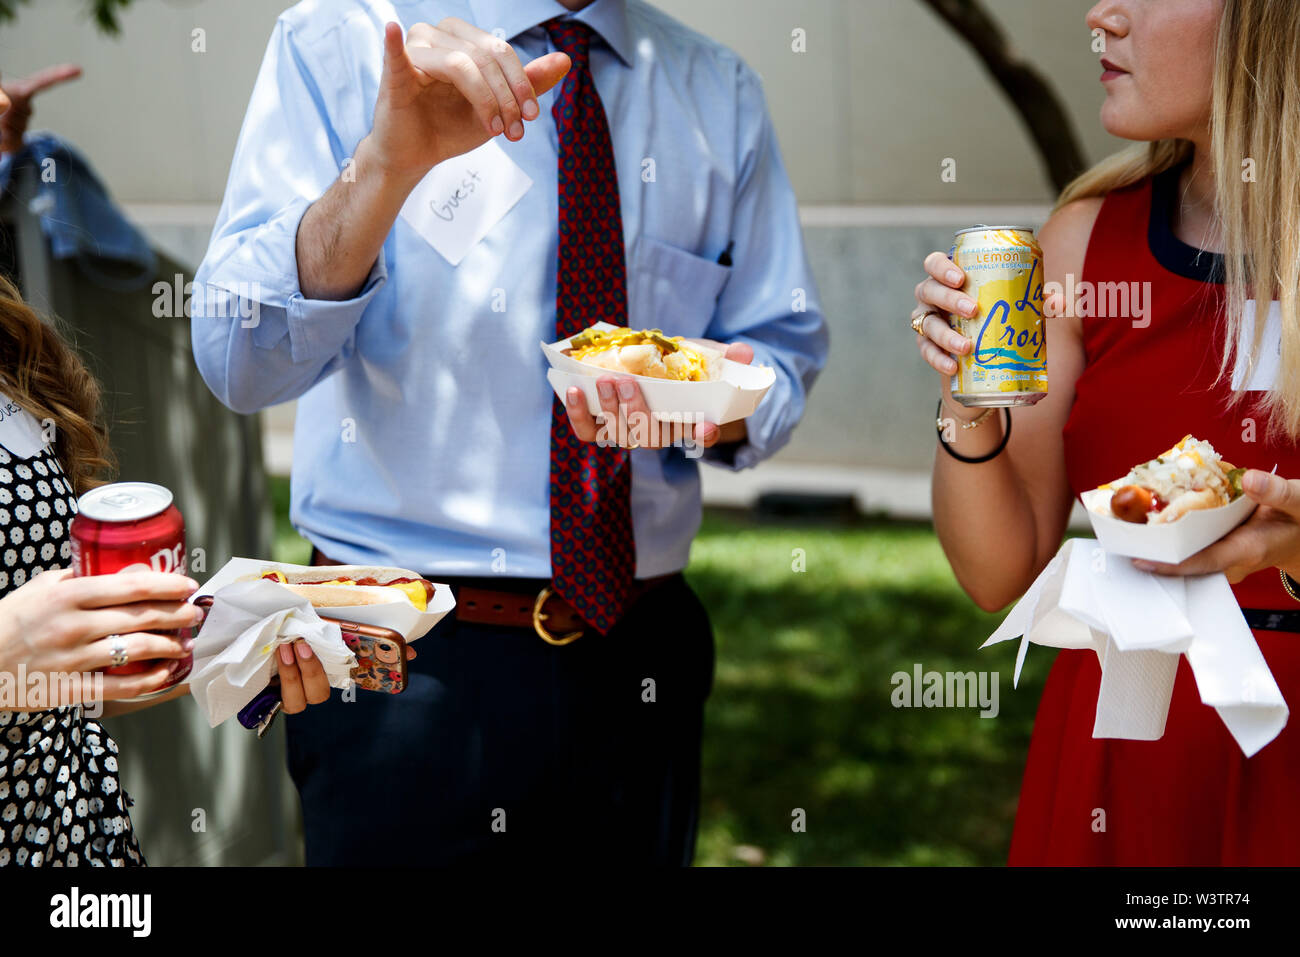 Washington, USA. 17th July, 2019. People eat hot dogs during the annual Hot Dog Lunch event at the Rayburn House Office Building on Capitol Hill in Washington, DC, the United States, on July 17, 2019. The event was held here on Wednesday in celebration of the National Hot Dog Day. Credit: Ting Shen/Xinhua/Alamy Live News Stock Photo